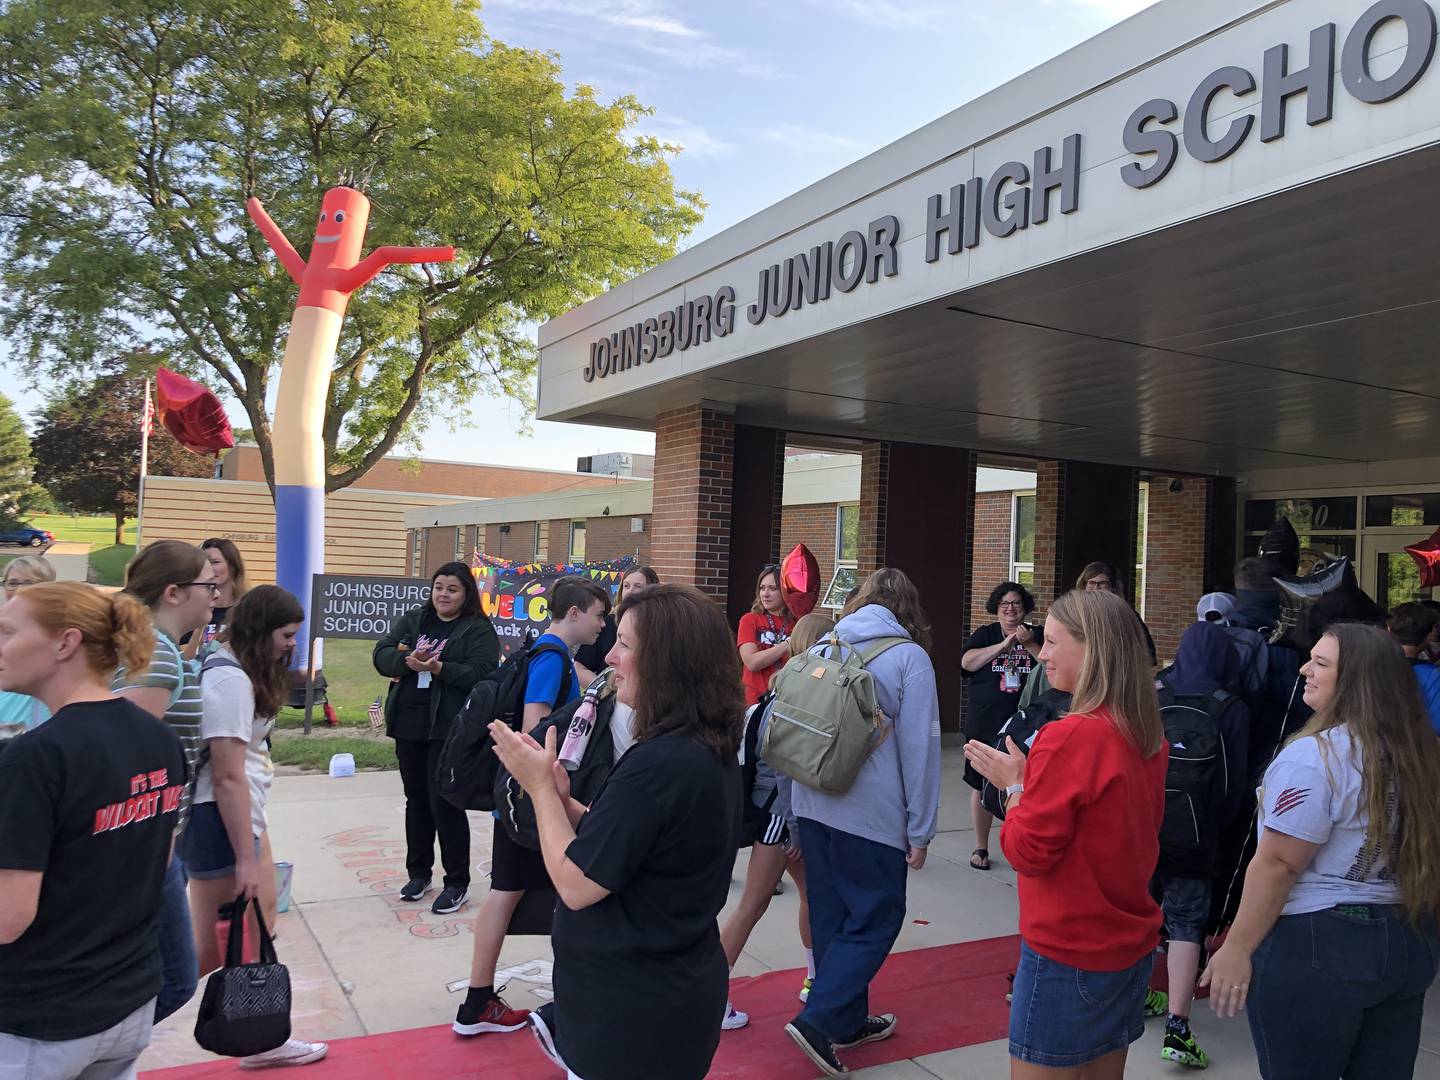 Pupils at Johnsburg Junior High School were welcomed back on Aug. 23, 2022, with fanfare including music and a red carpet reception.